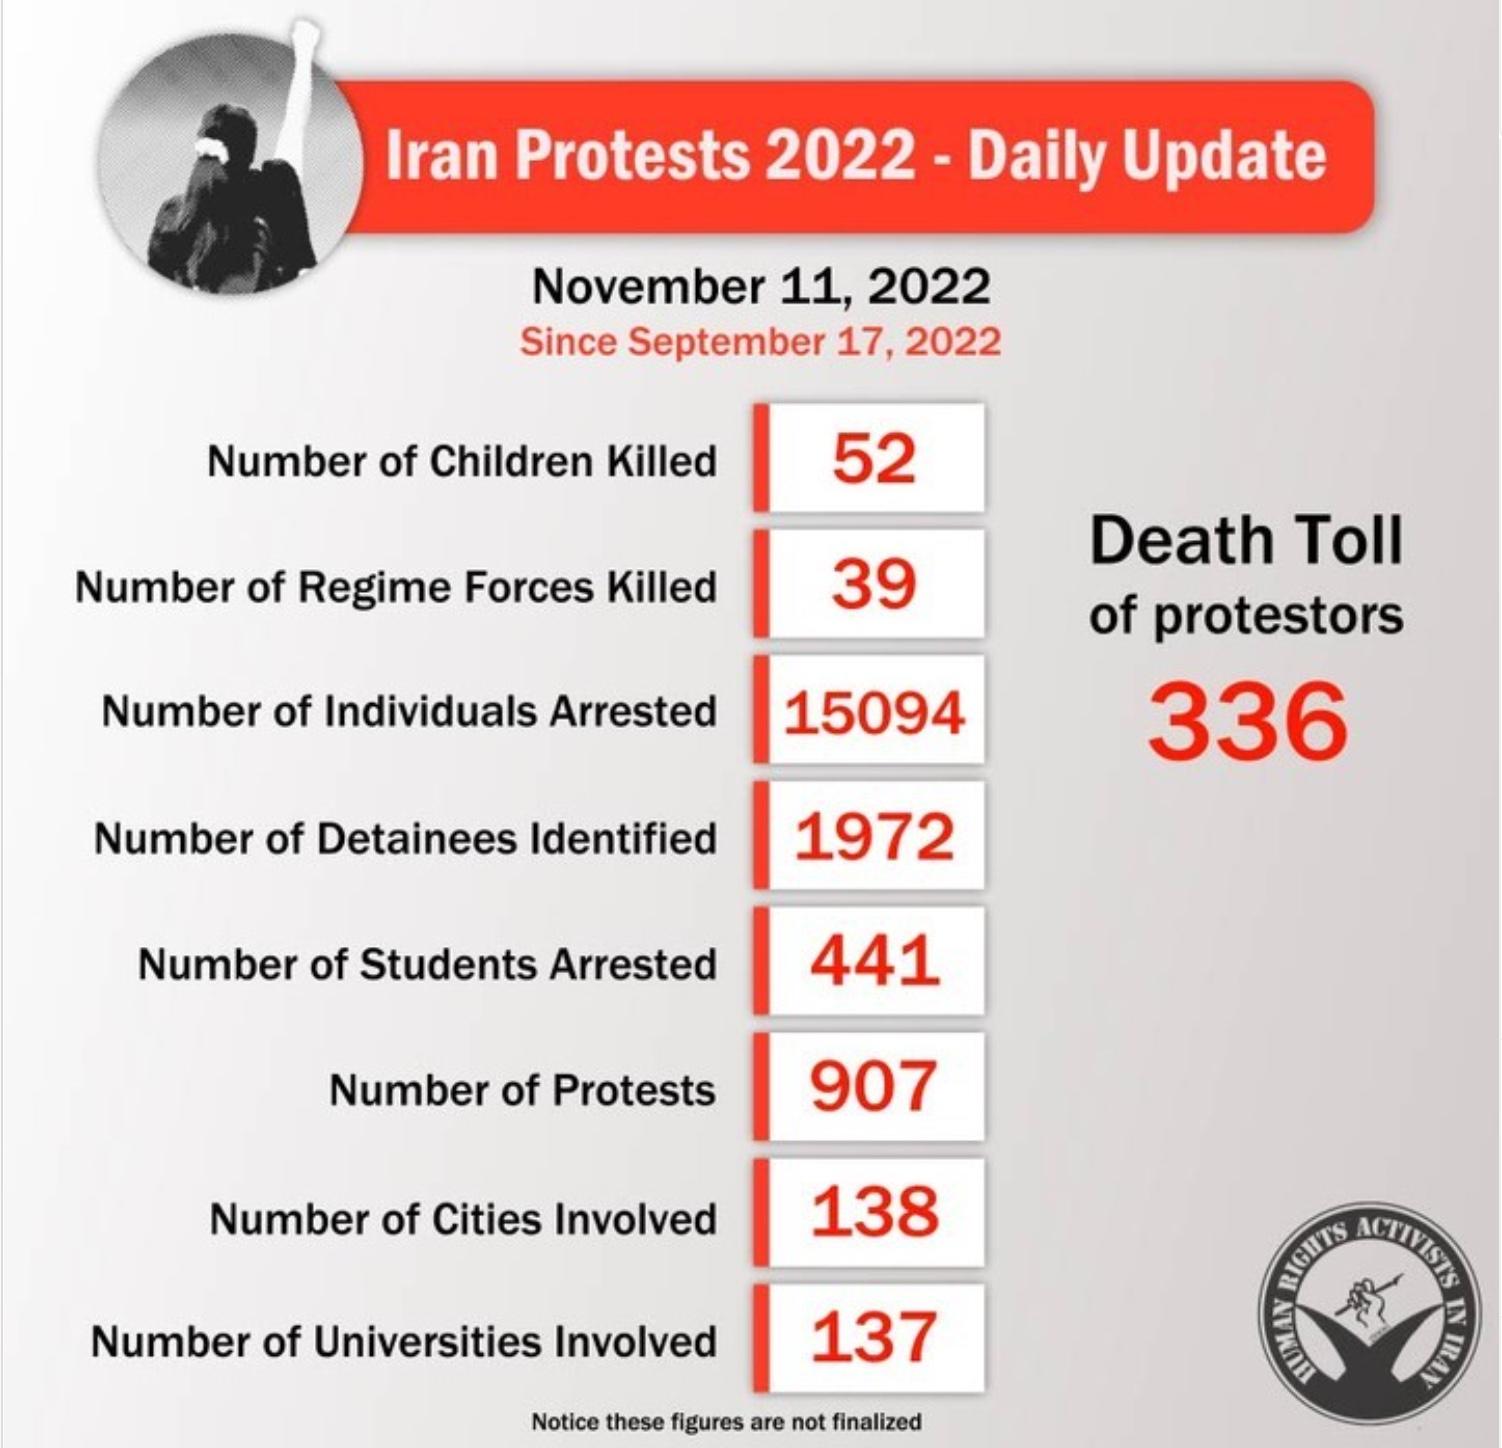 Graph of number of protests in Iran in 2022 and other statistics